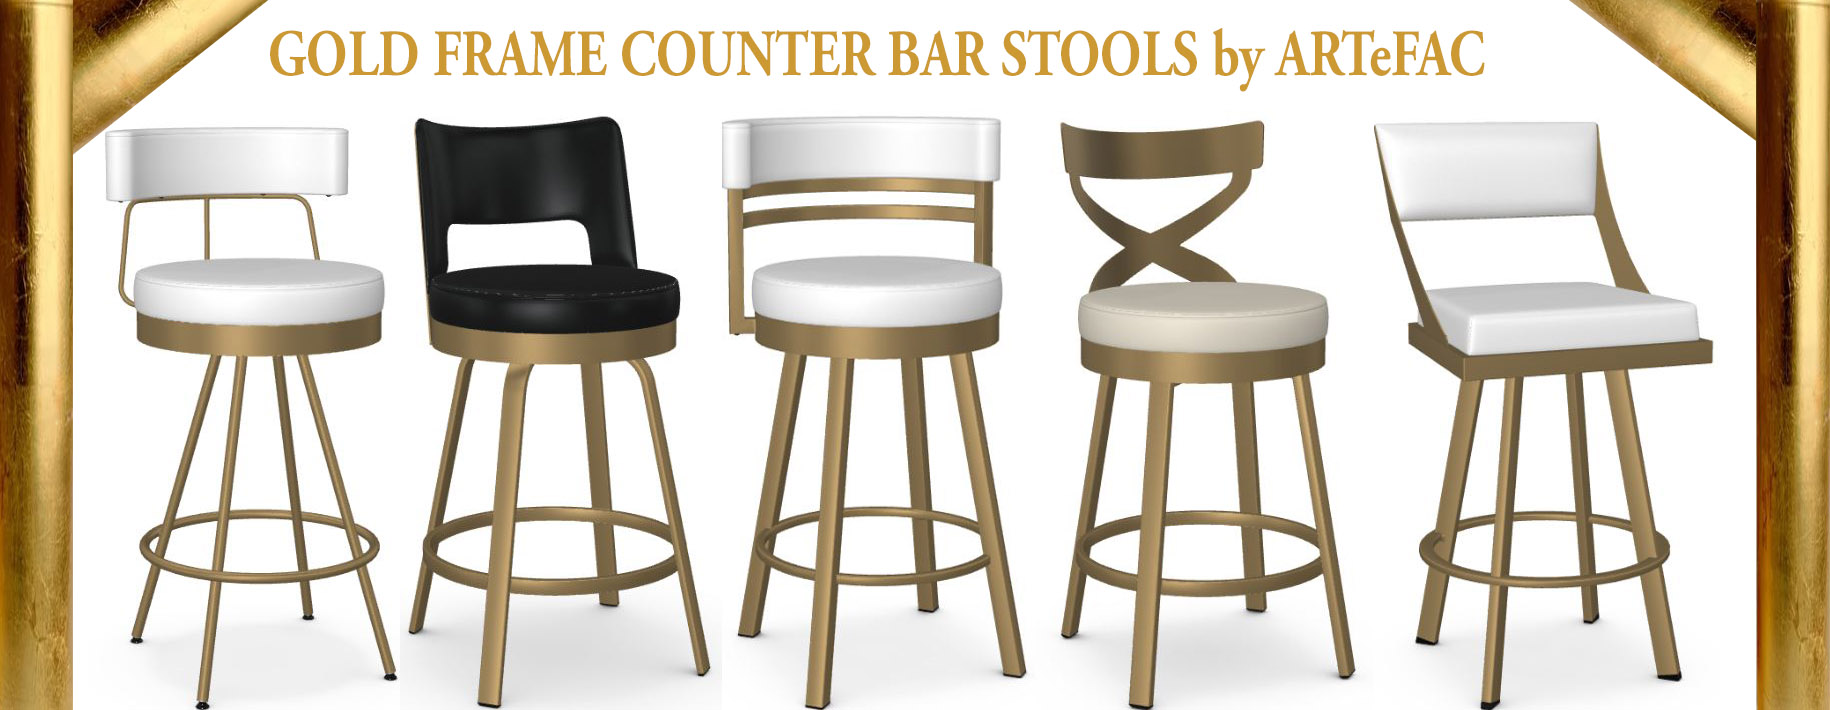 Chairs Bar Stools In Usa Artefac, Small Bar Stools Without Backs